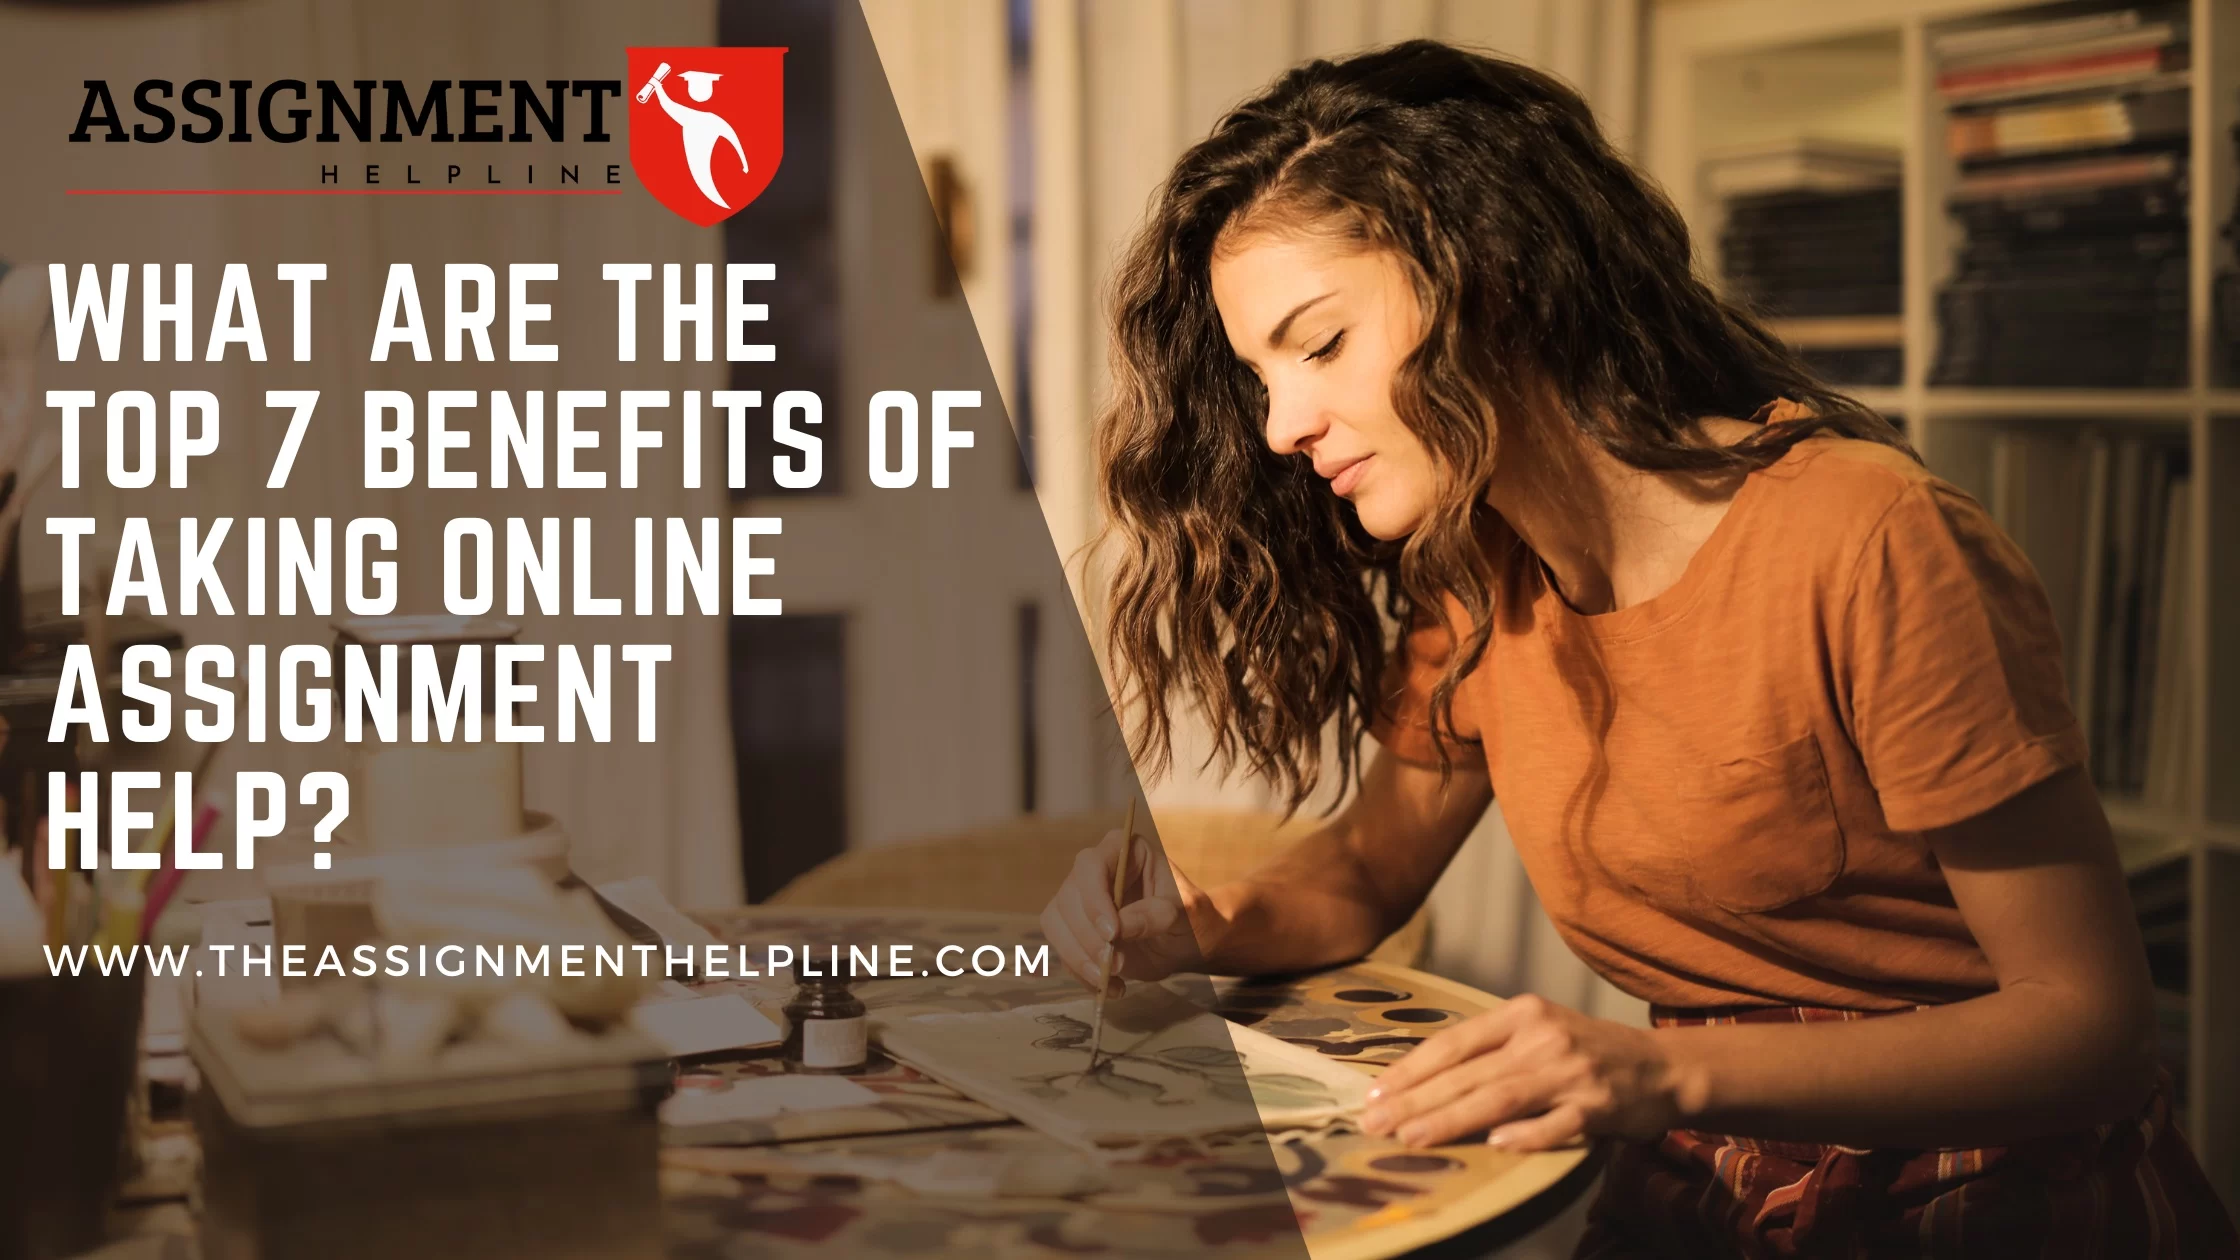 What Are The Top 7 Benefits Of Taking Online Assignment Help